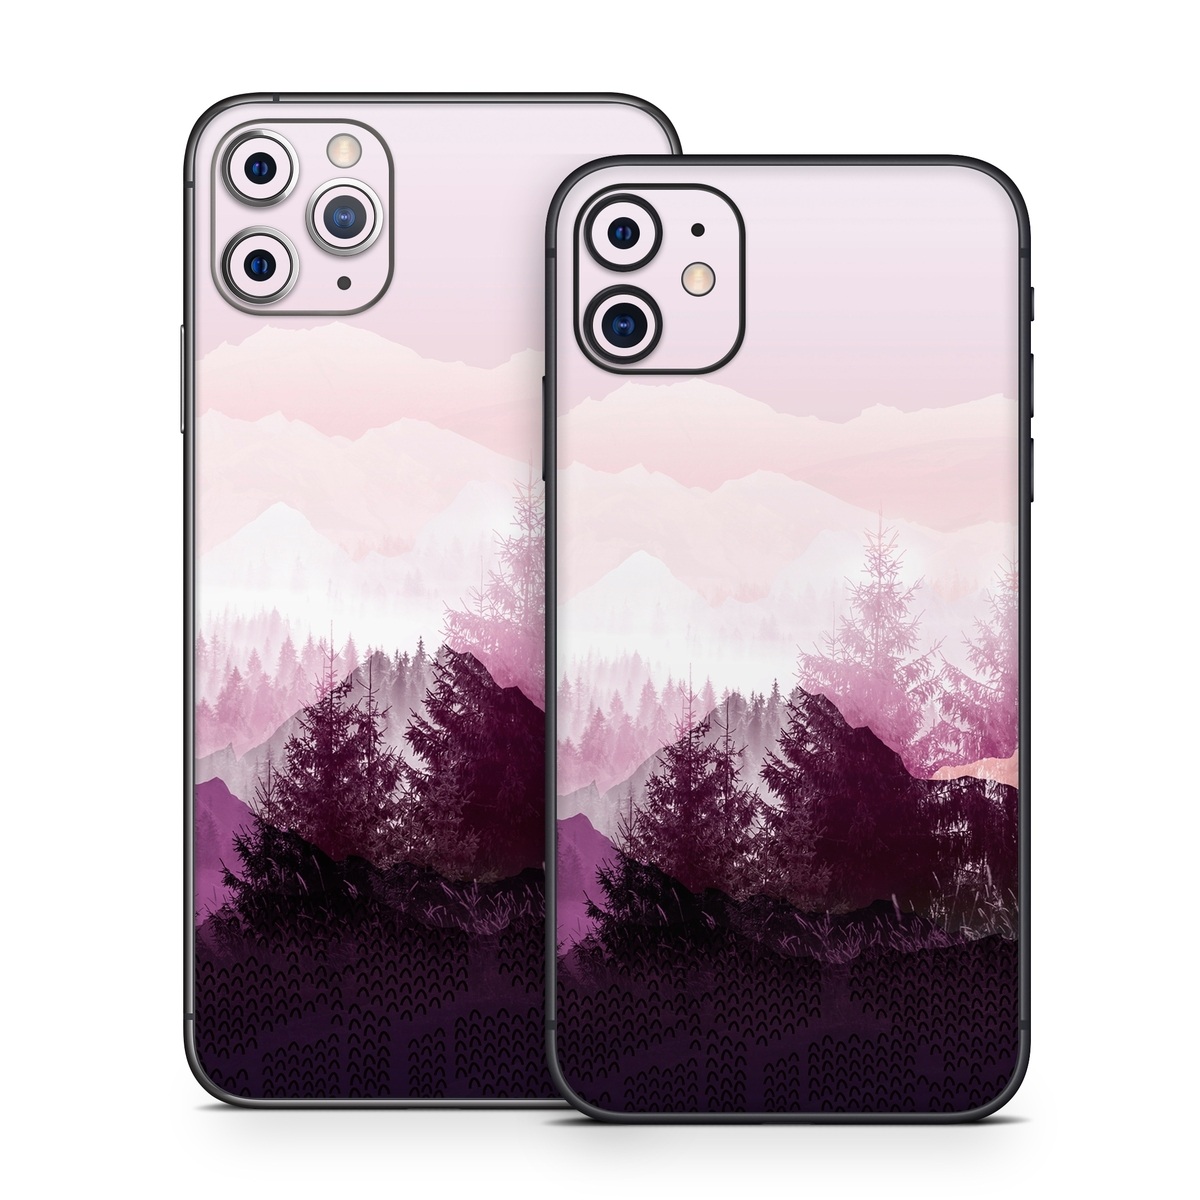 iPhone 11 Series Skin design of Sky, Purple, Atmospheric phenomenon, Pink, Natural landscape, Violet, Mountain, Tree, Morning, Mountain range, with white, purple, black, pink colors